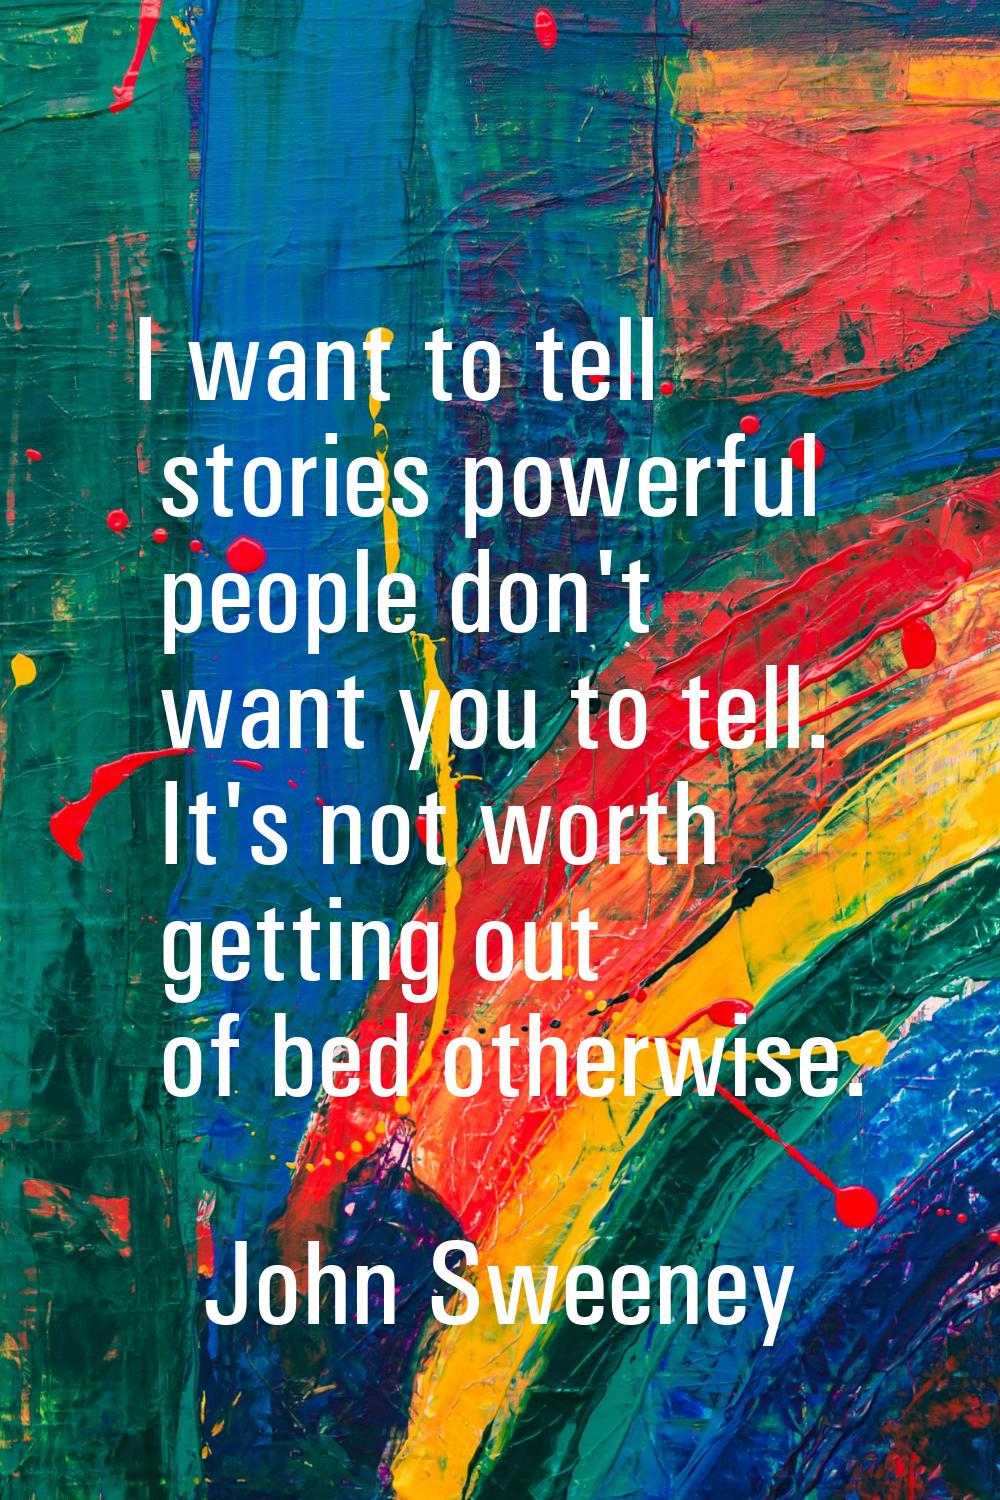 I want to tell stories powerful people don't want you to tell. It's not worth getting out of bed ot